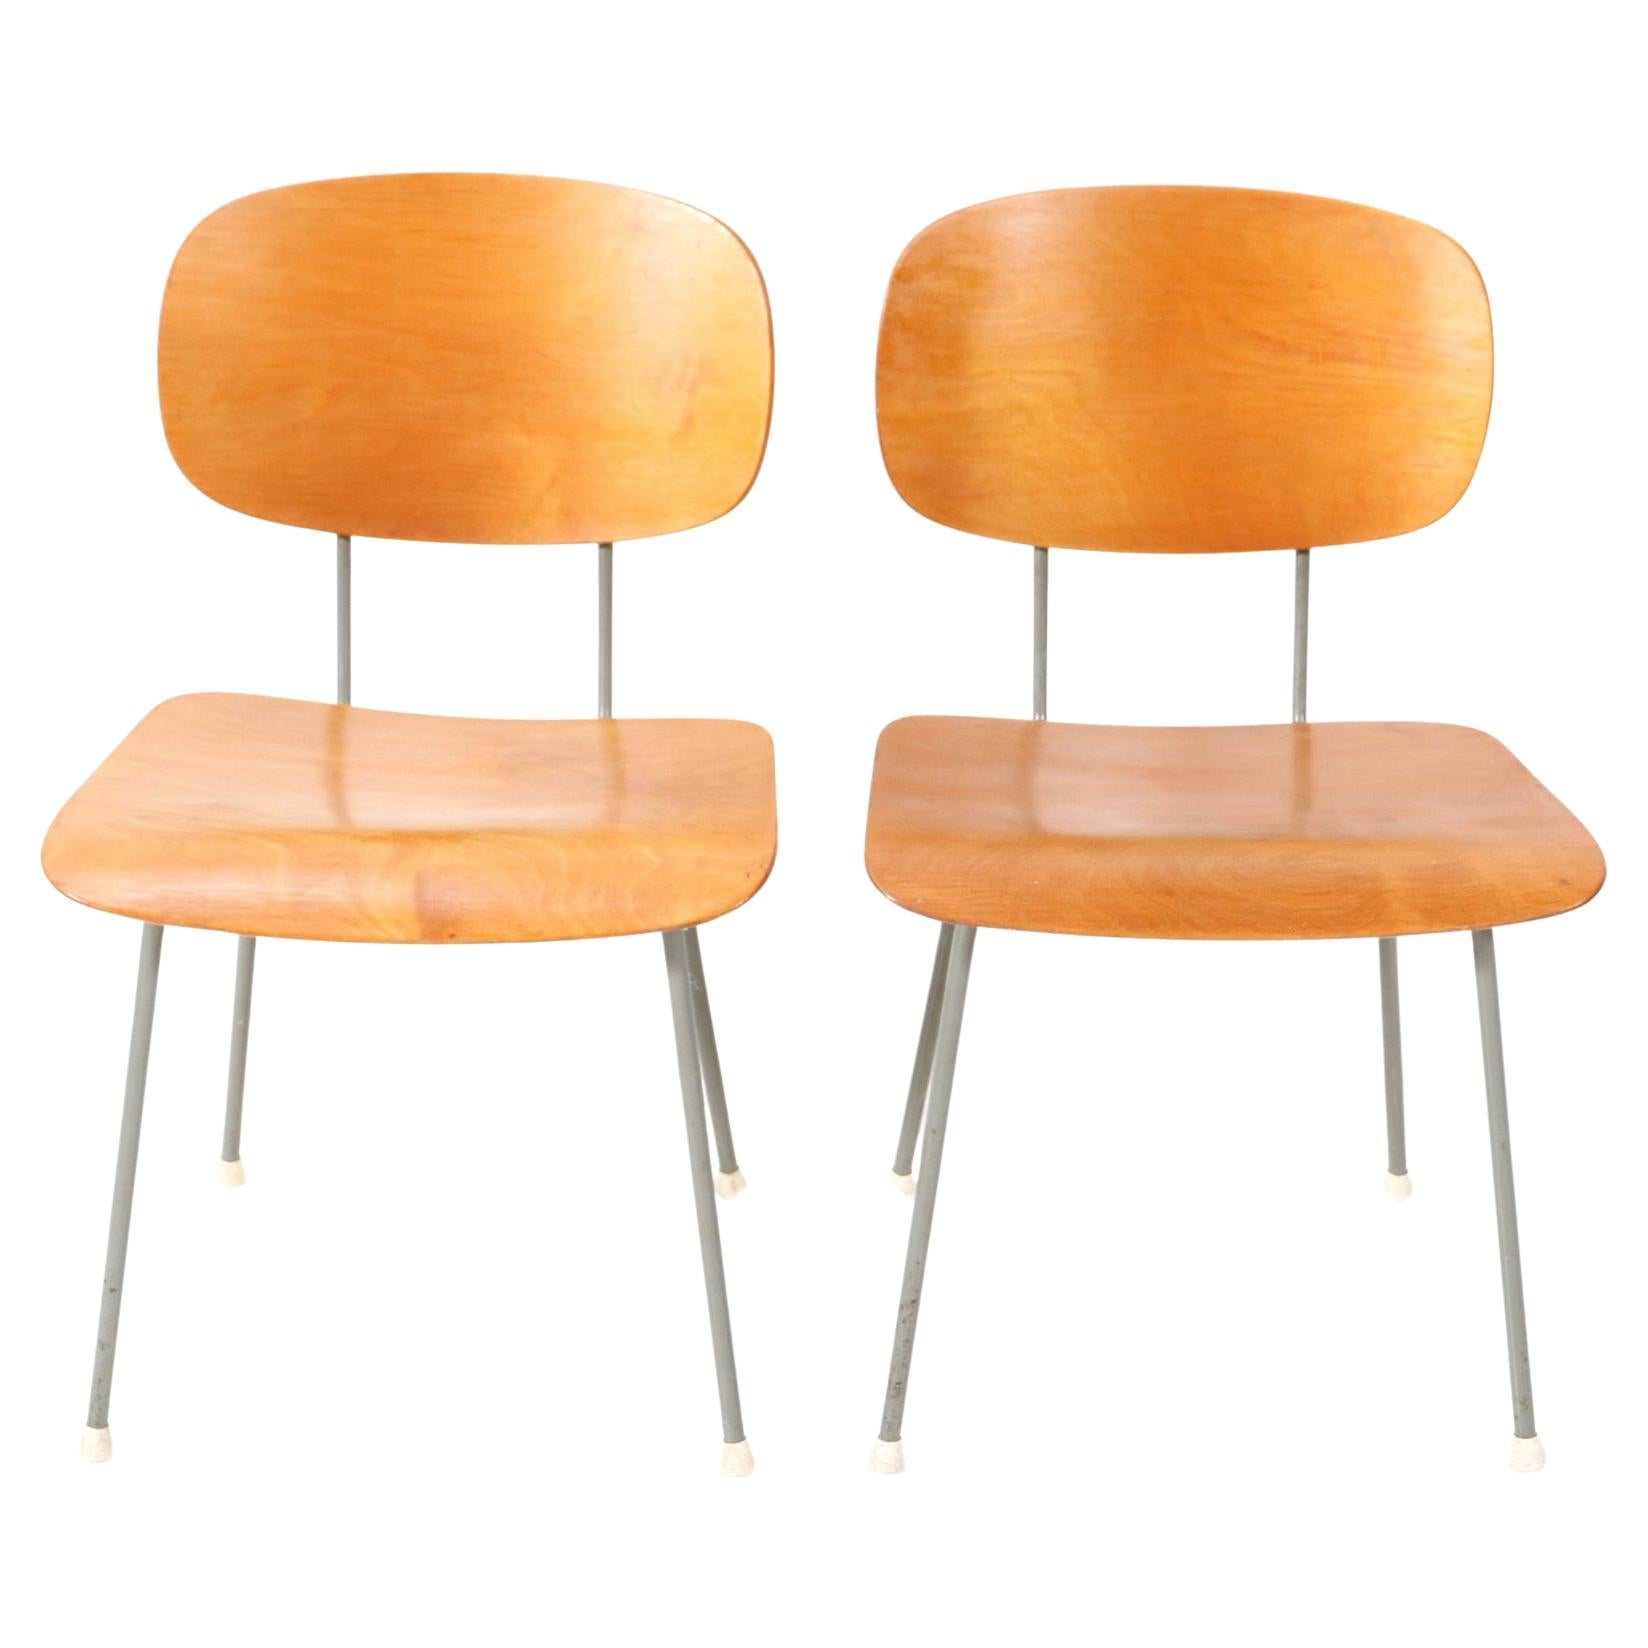 Pair of Mid-Century Modern Model 116 Side Chairs by Wim Rietveld for Gispen For Sale